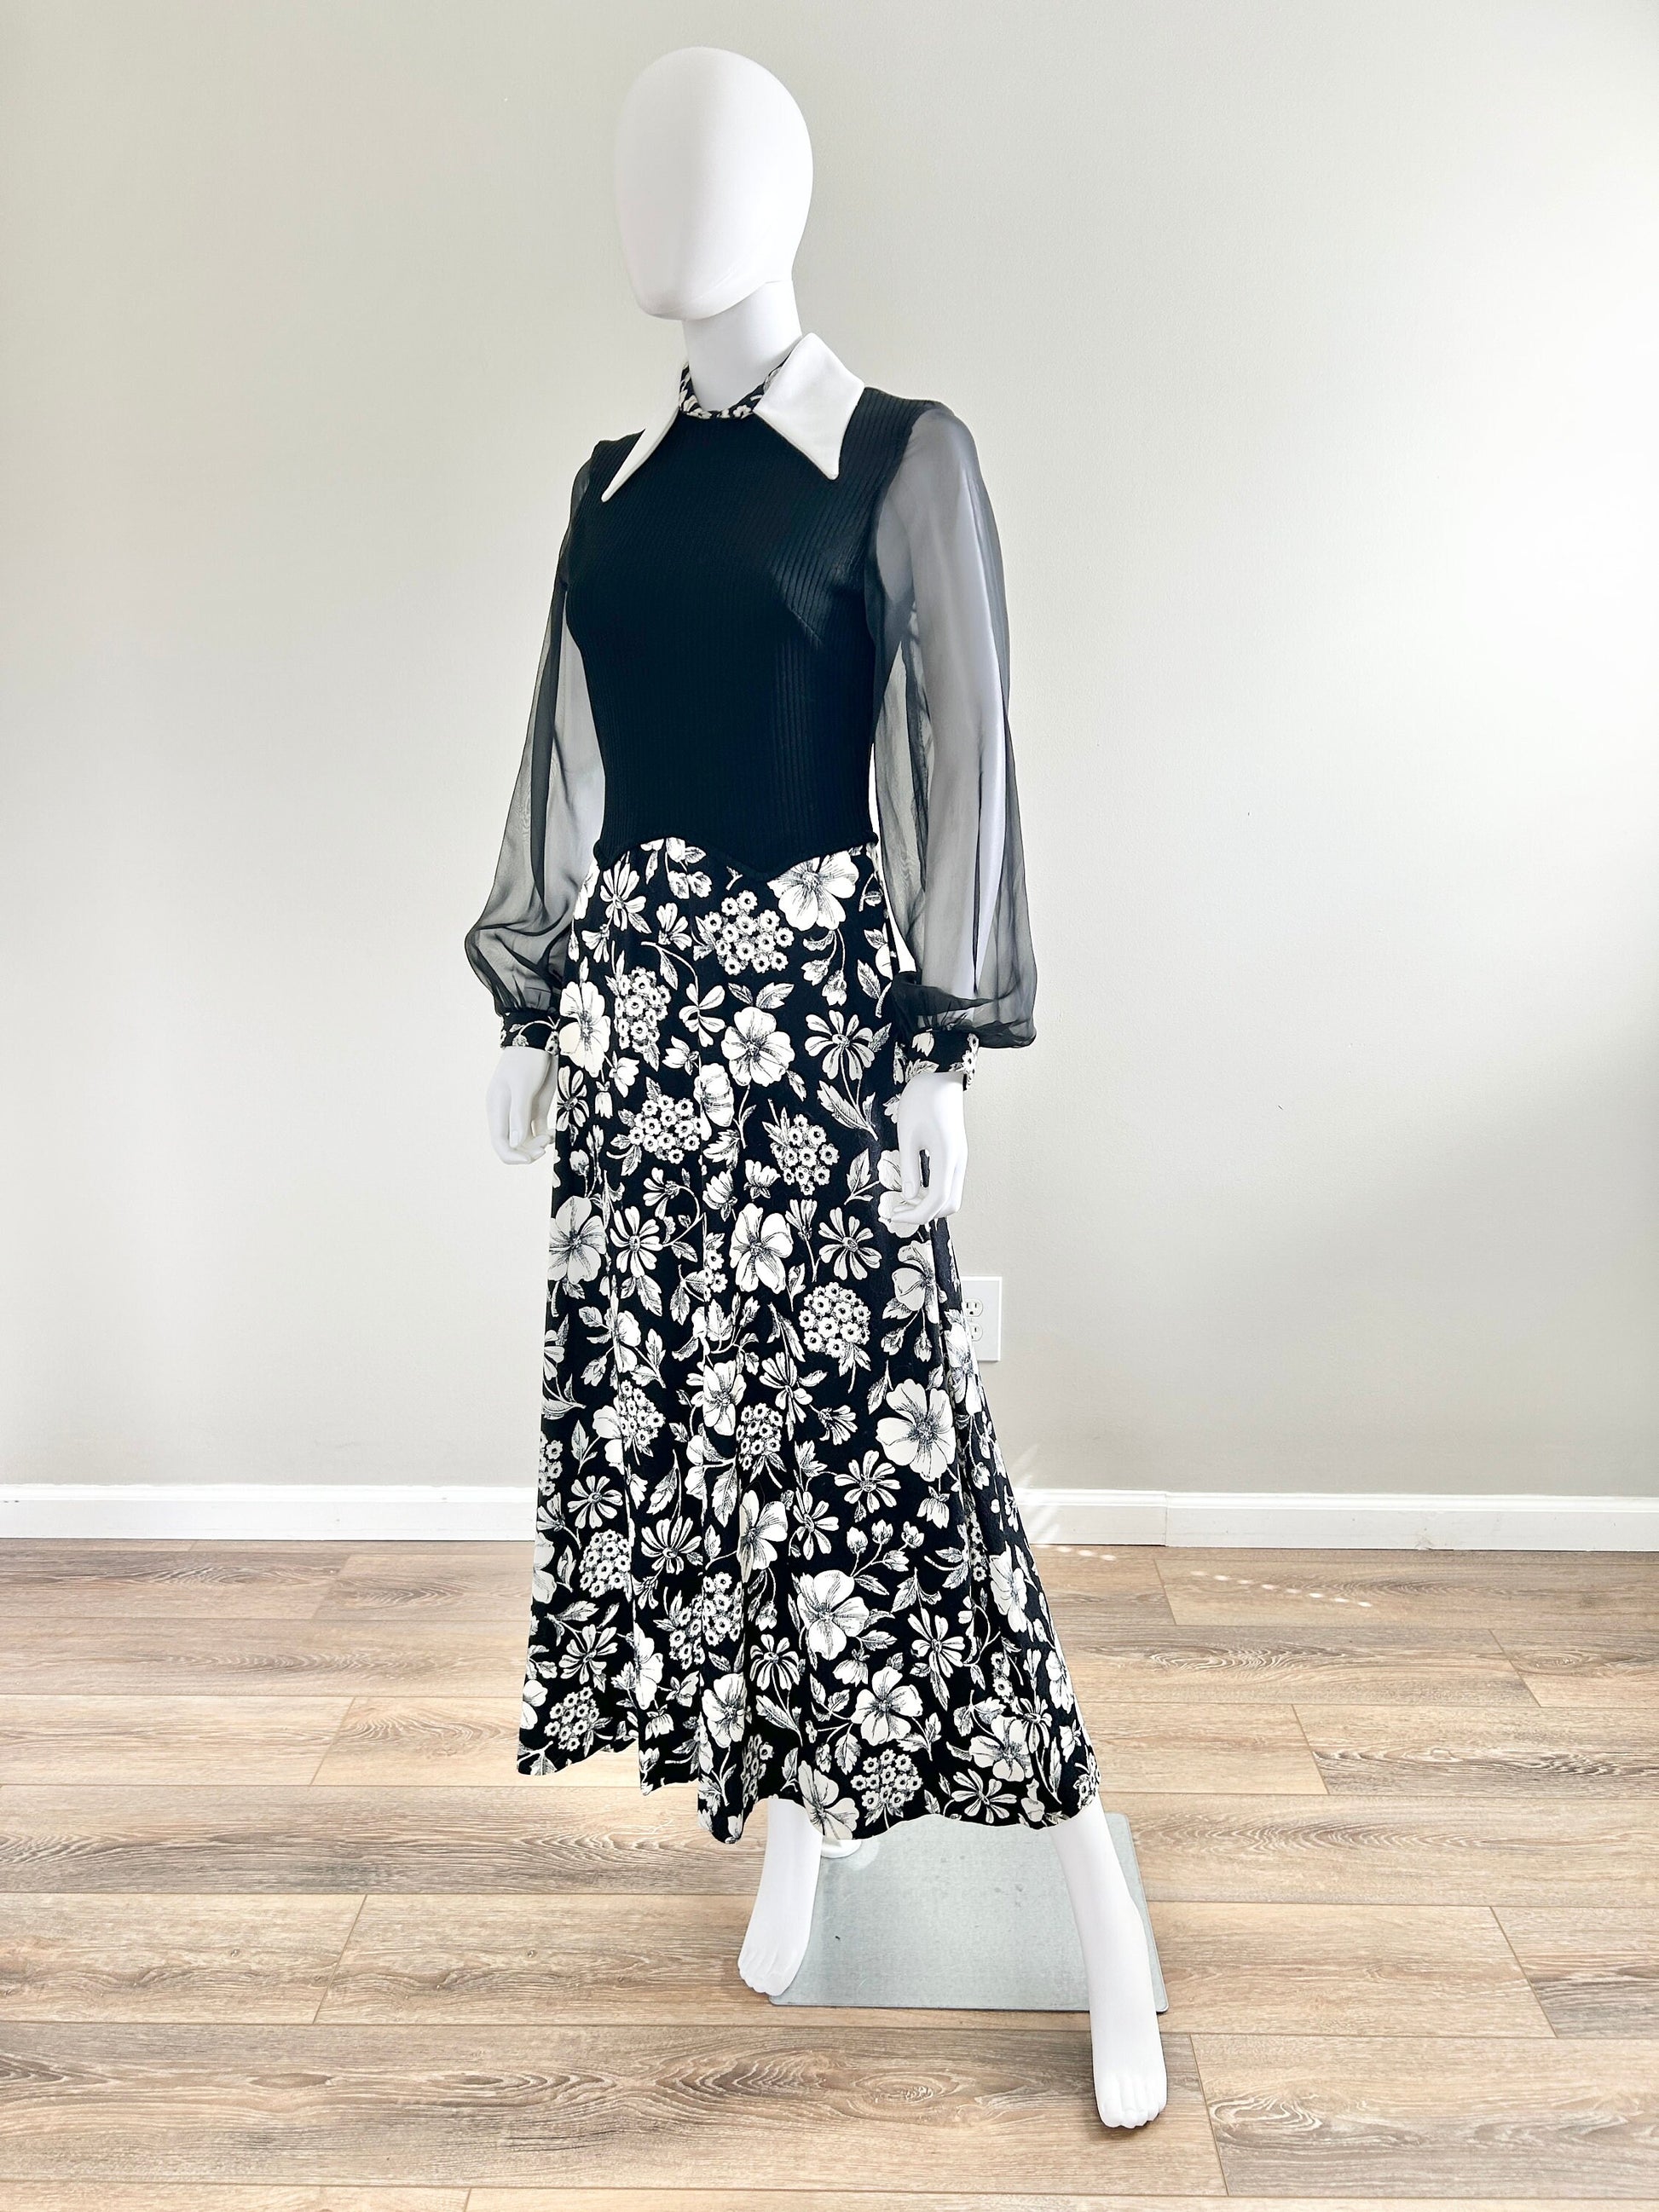 Vintage 1970s Black and White Floral Maxi Dress / 70s Retro Dress with Sheer Balloon Sleeves / Size S M